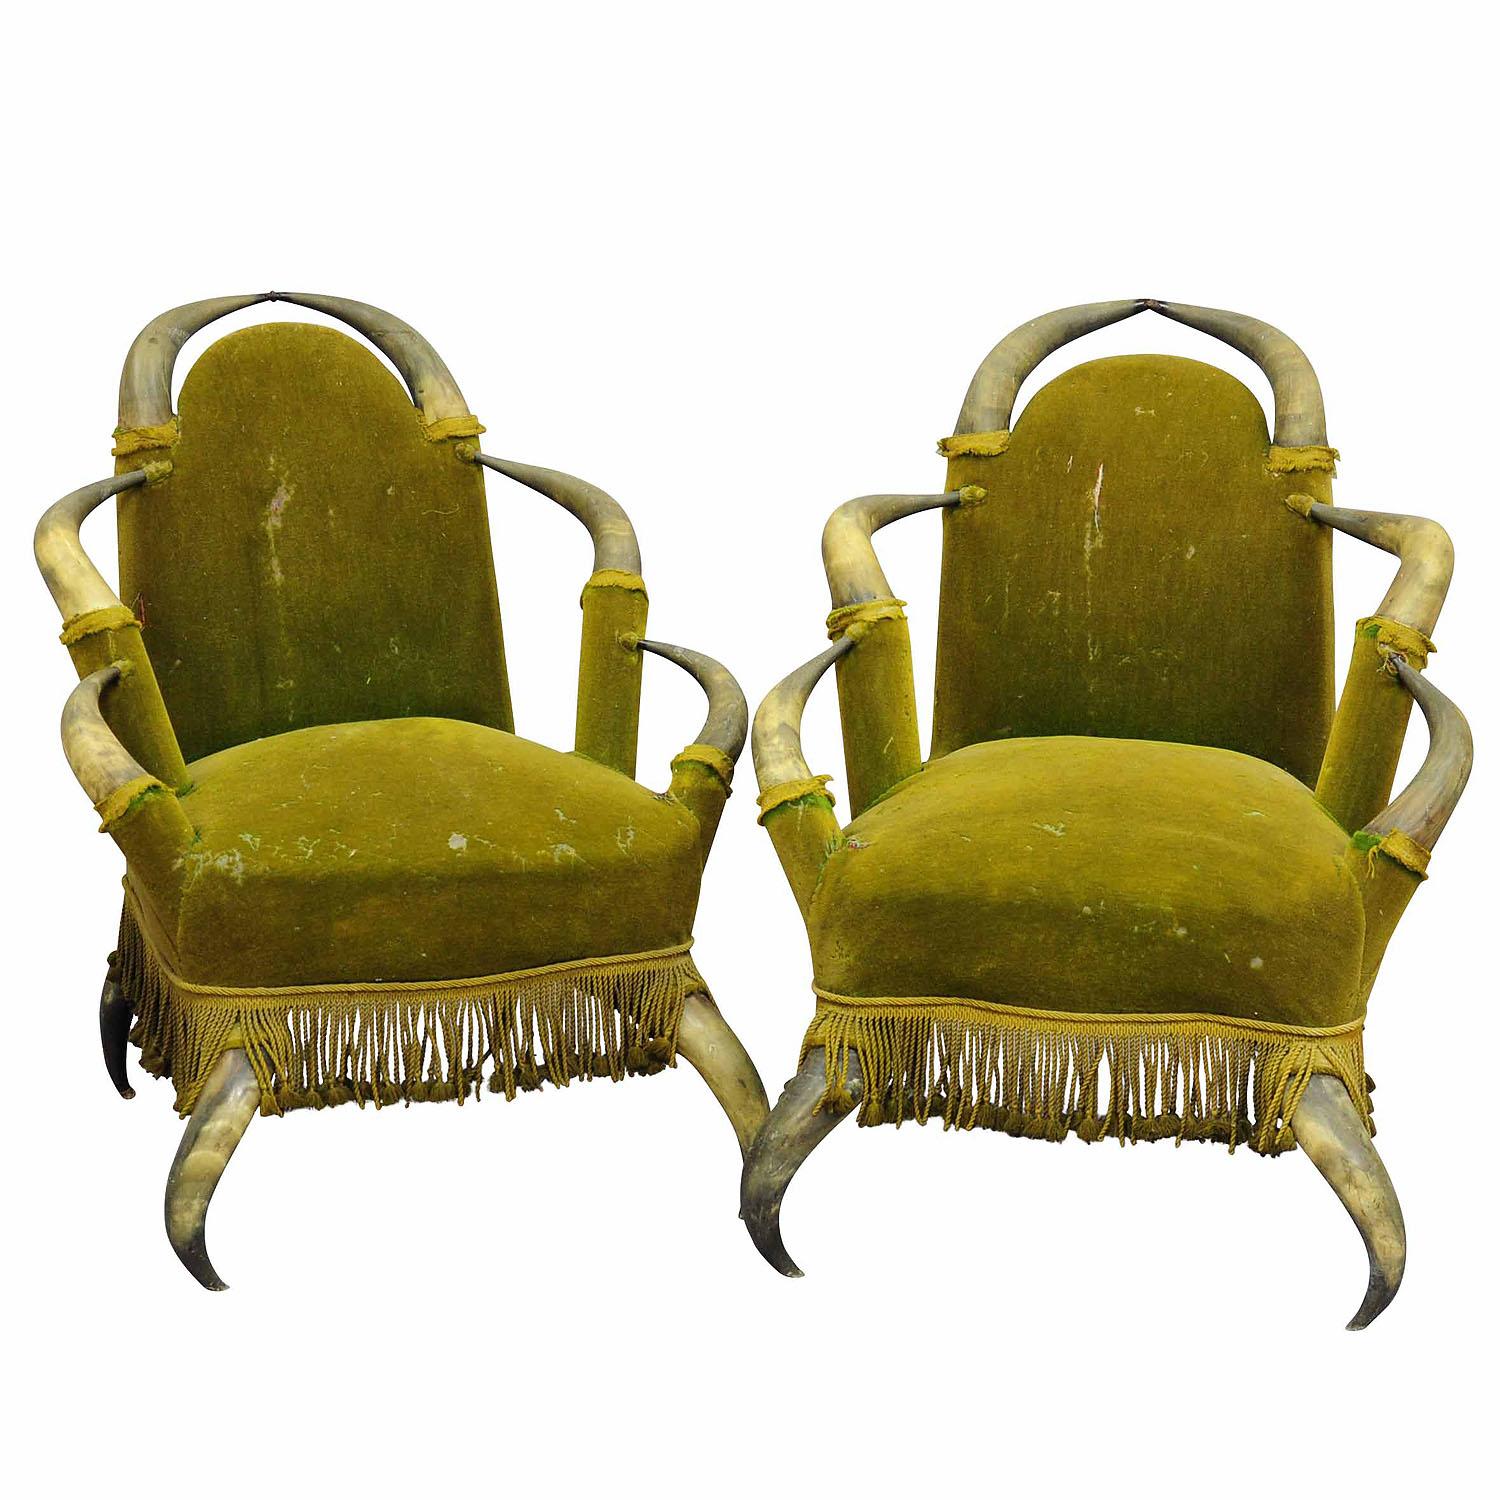 Pair of Antique Bull Horn Chairs Austria 1870

A pair antique bull horn chairs, from a noble villa in Austria. The seats are with antique green velvet fabric. The chairs are in unrestored original condition, fabric needs to be renewed.

At the